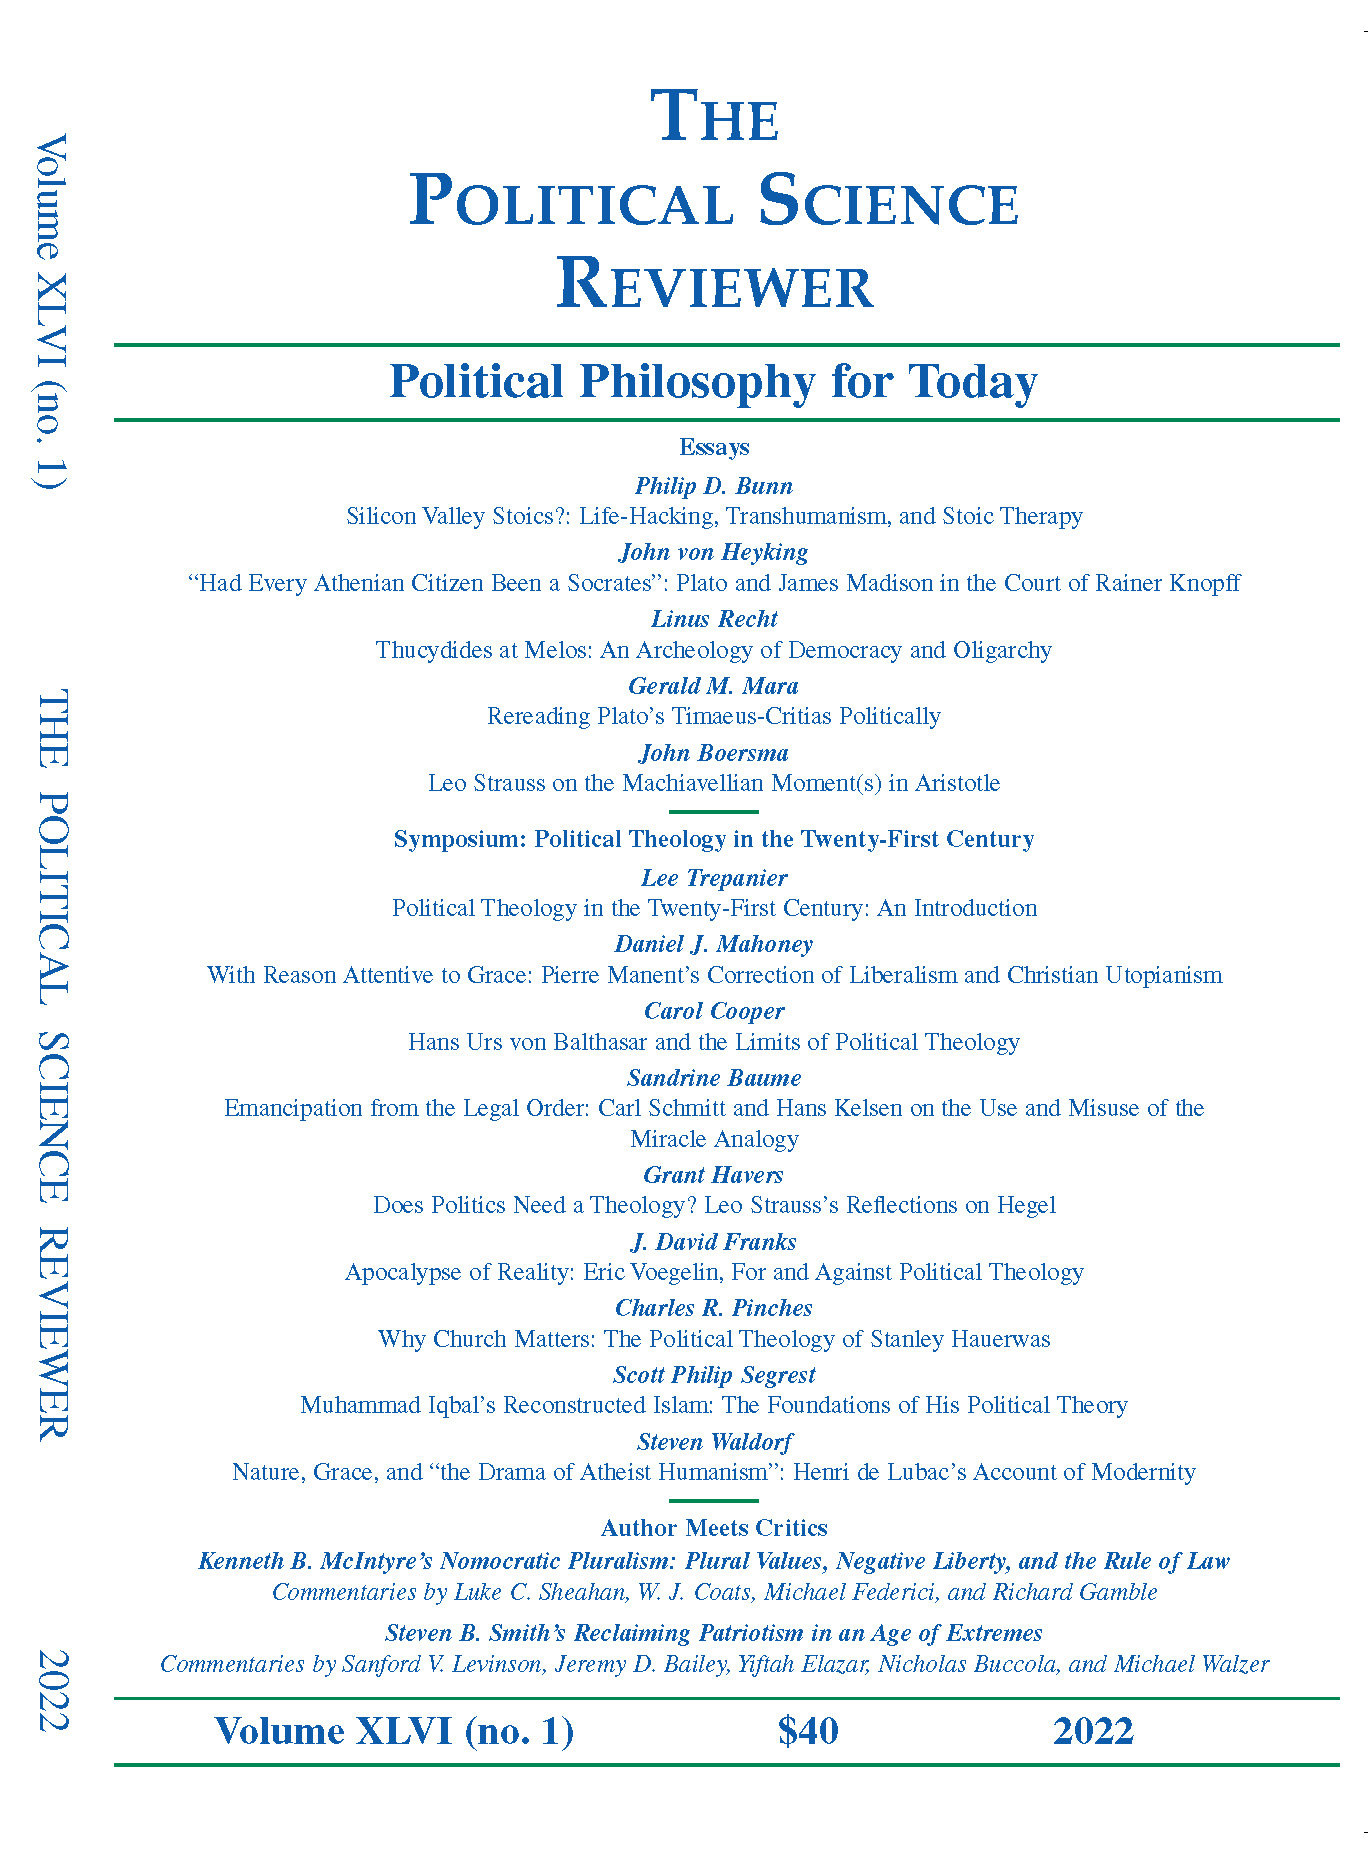 Cover of Political Science Reviewer 46.1